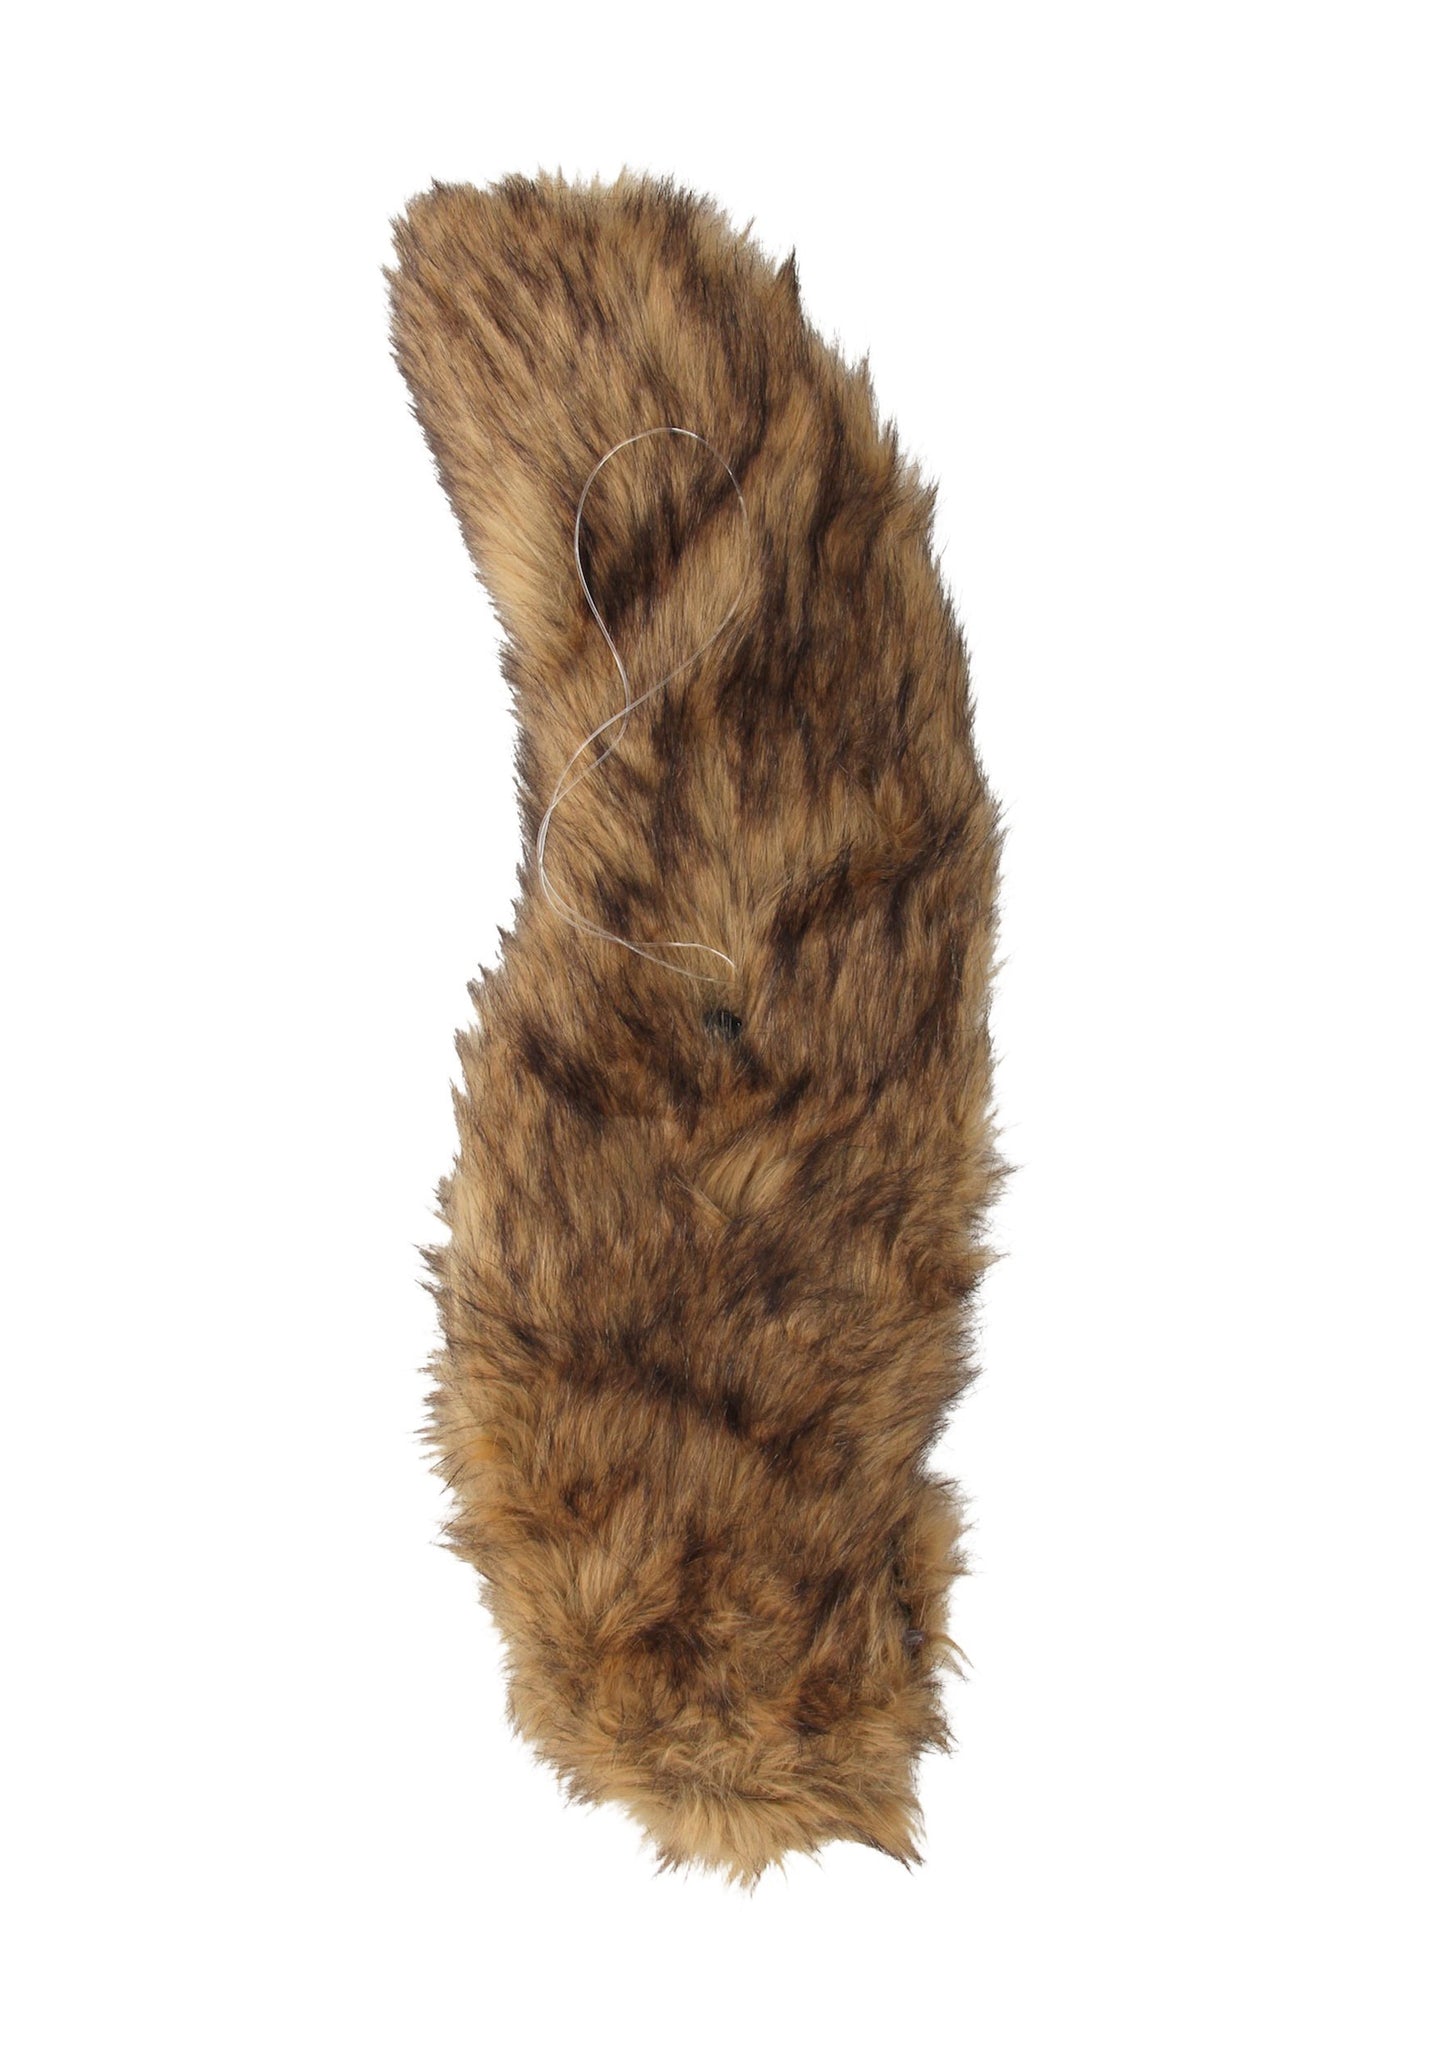 Deluxe Oversized Squirrel Tail